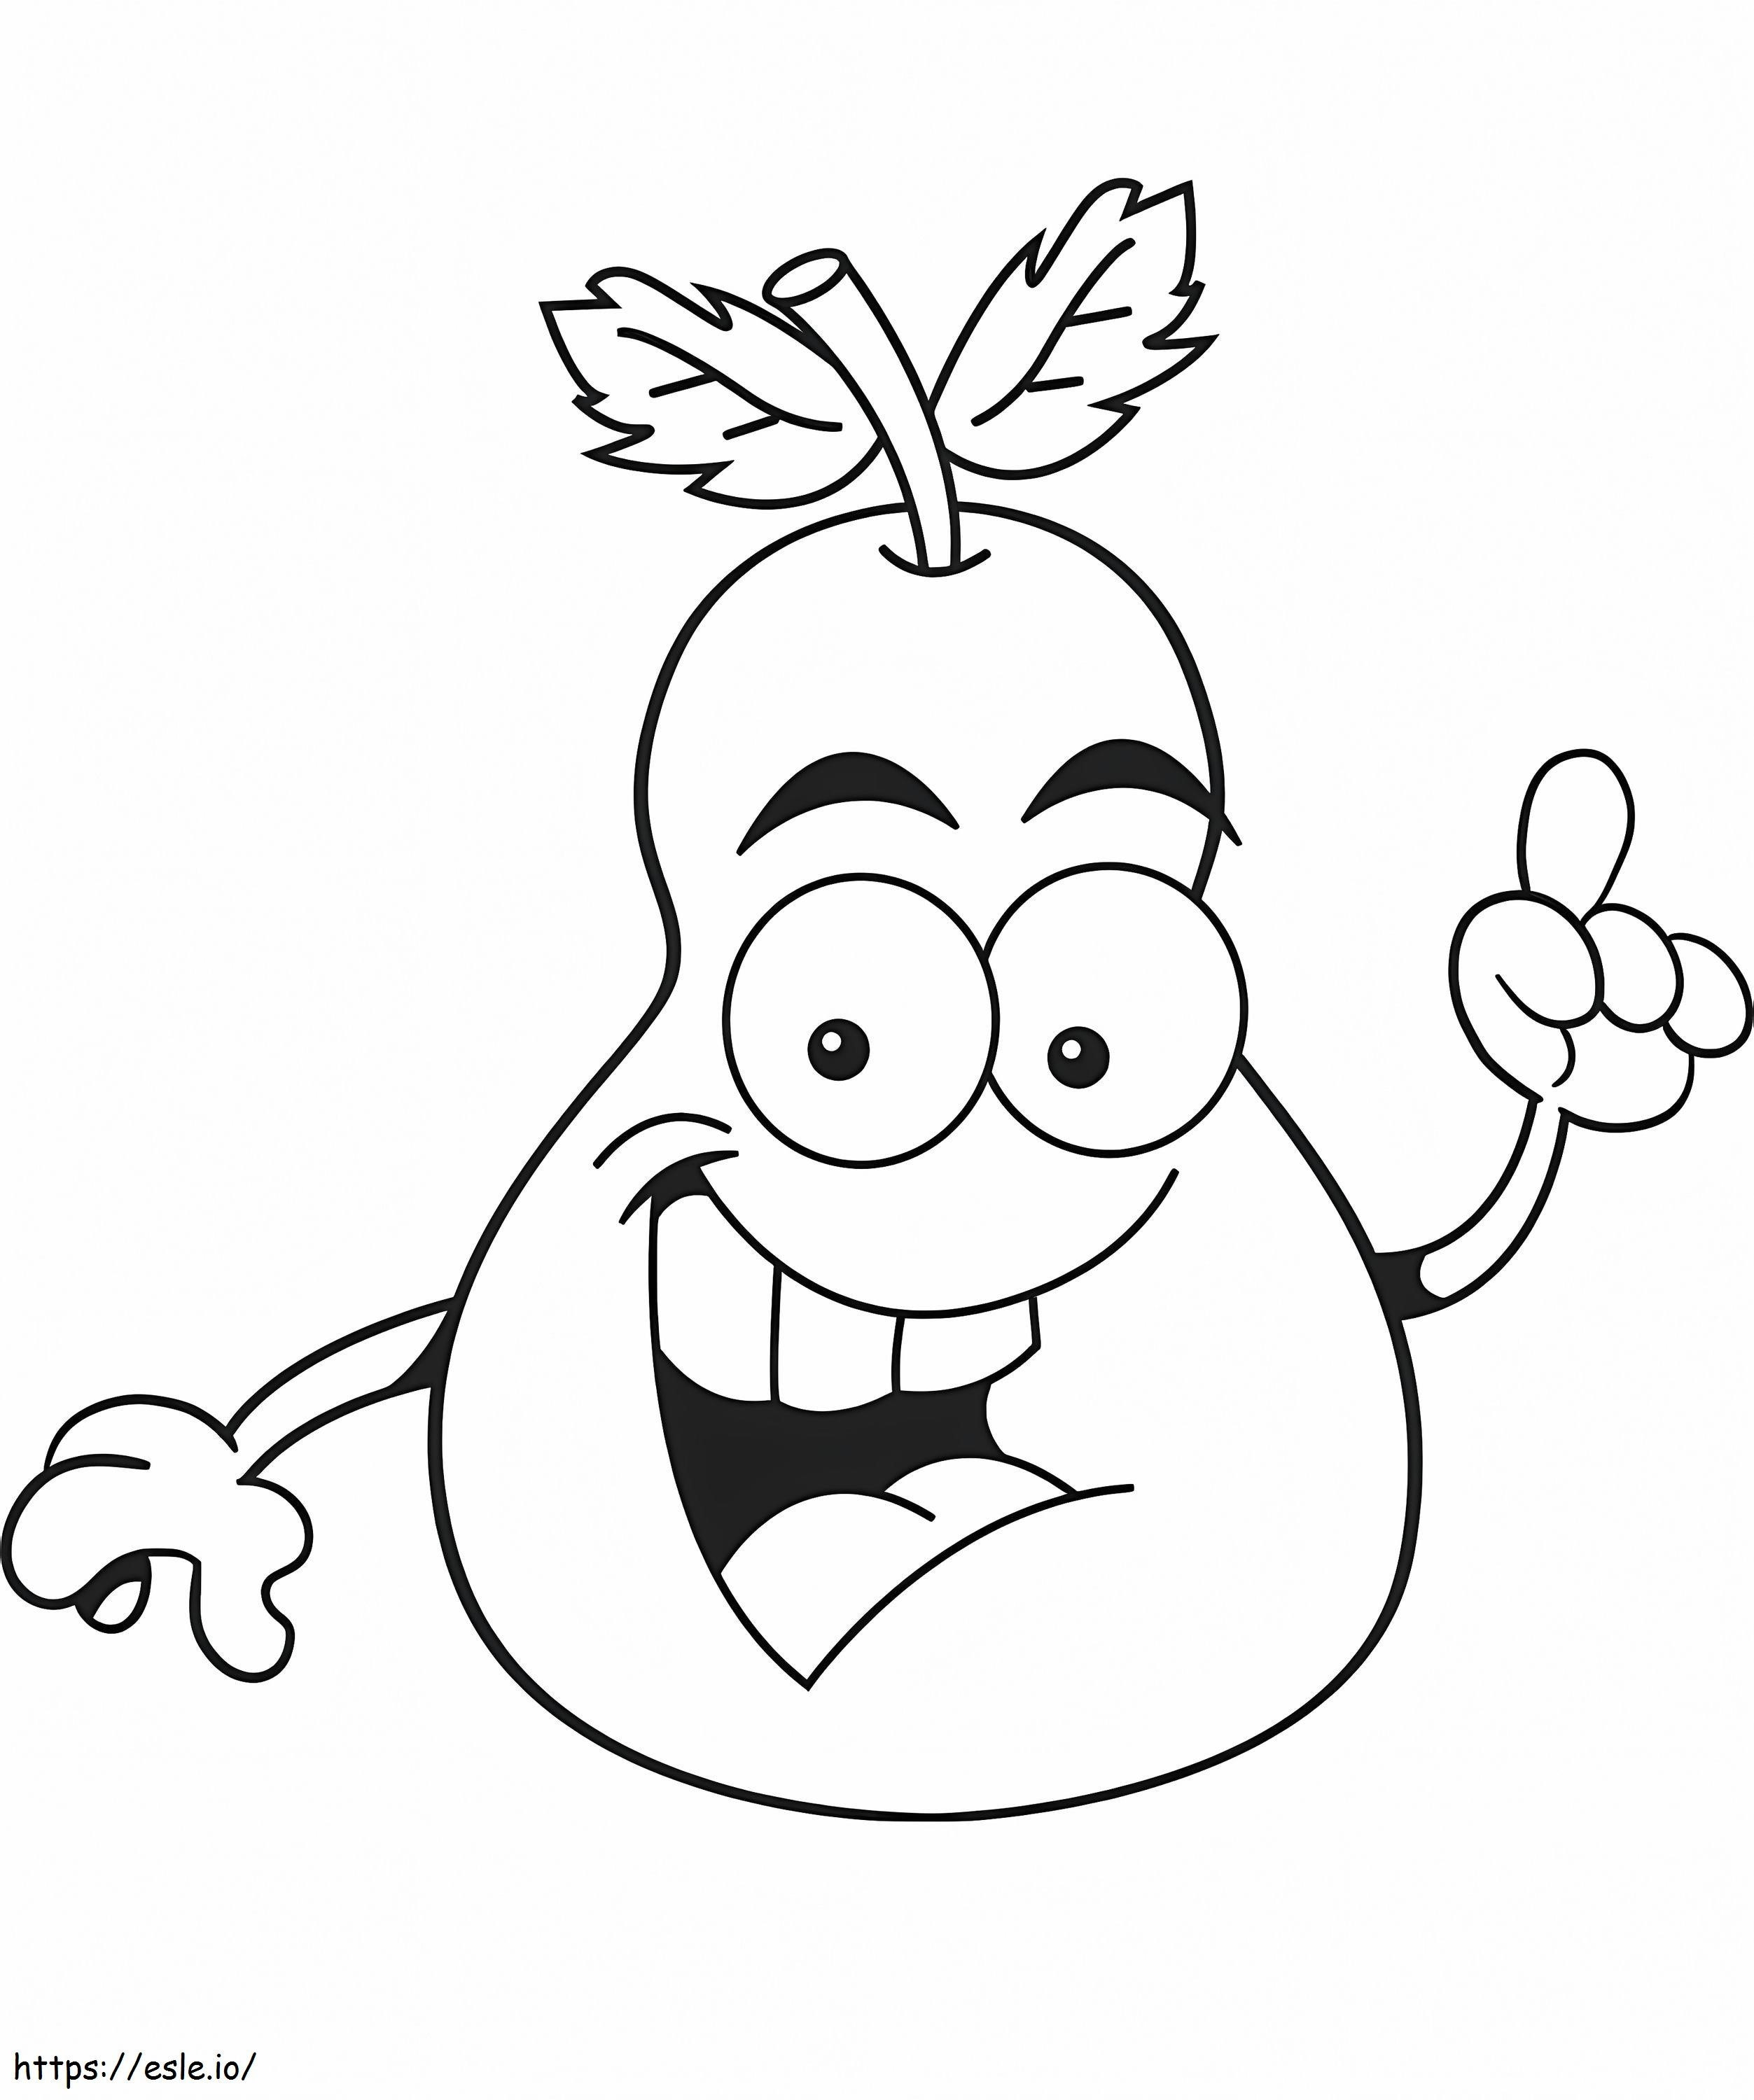 Smiling Pear coloring page